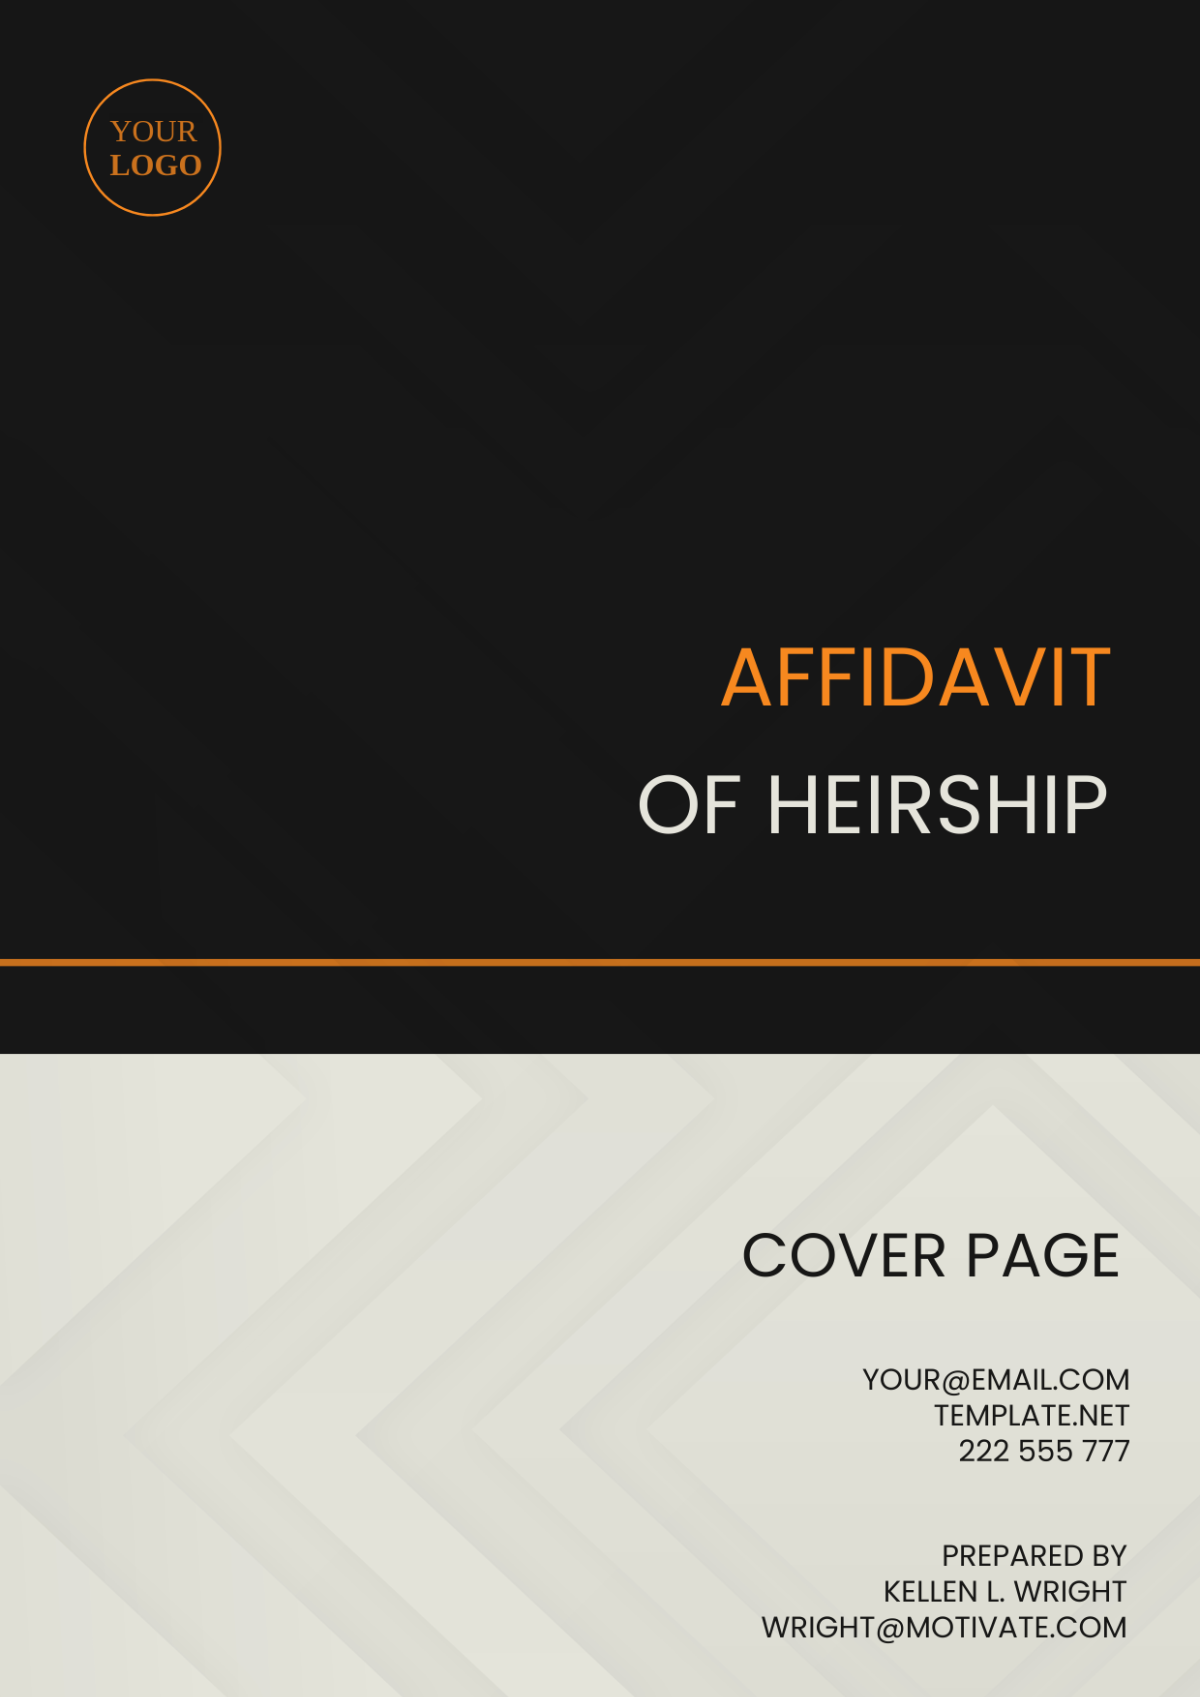 Affidavit of Heirship Cover Page Template